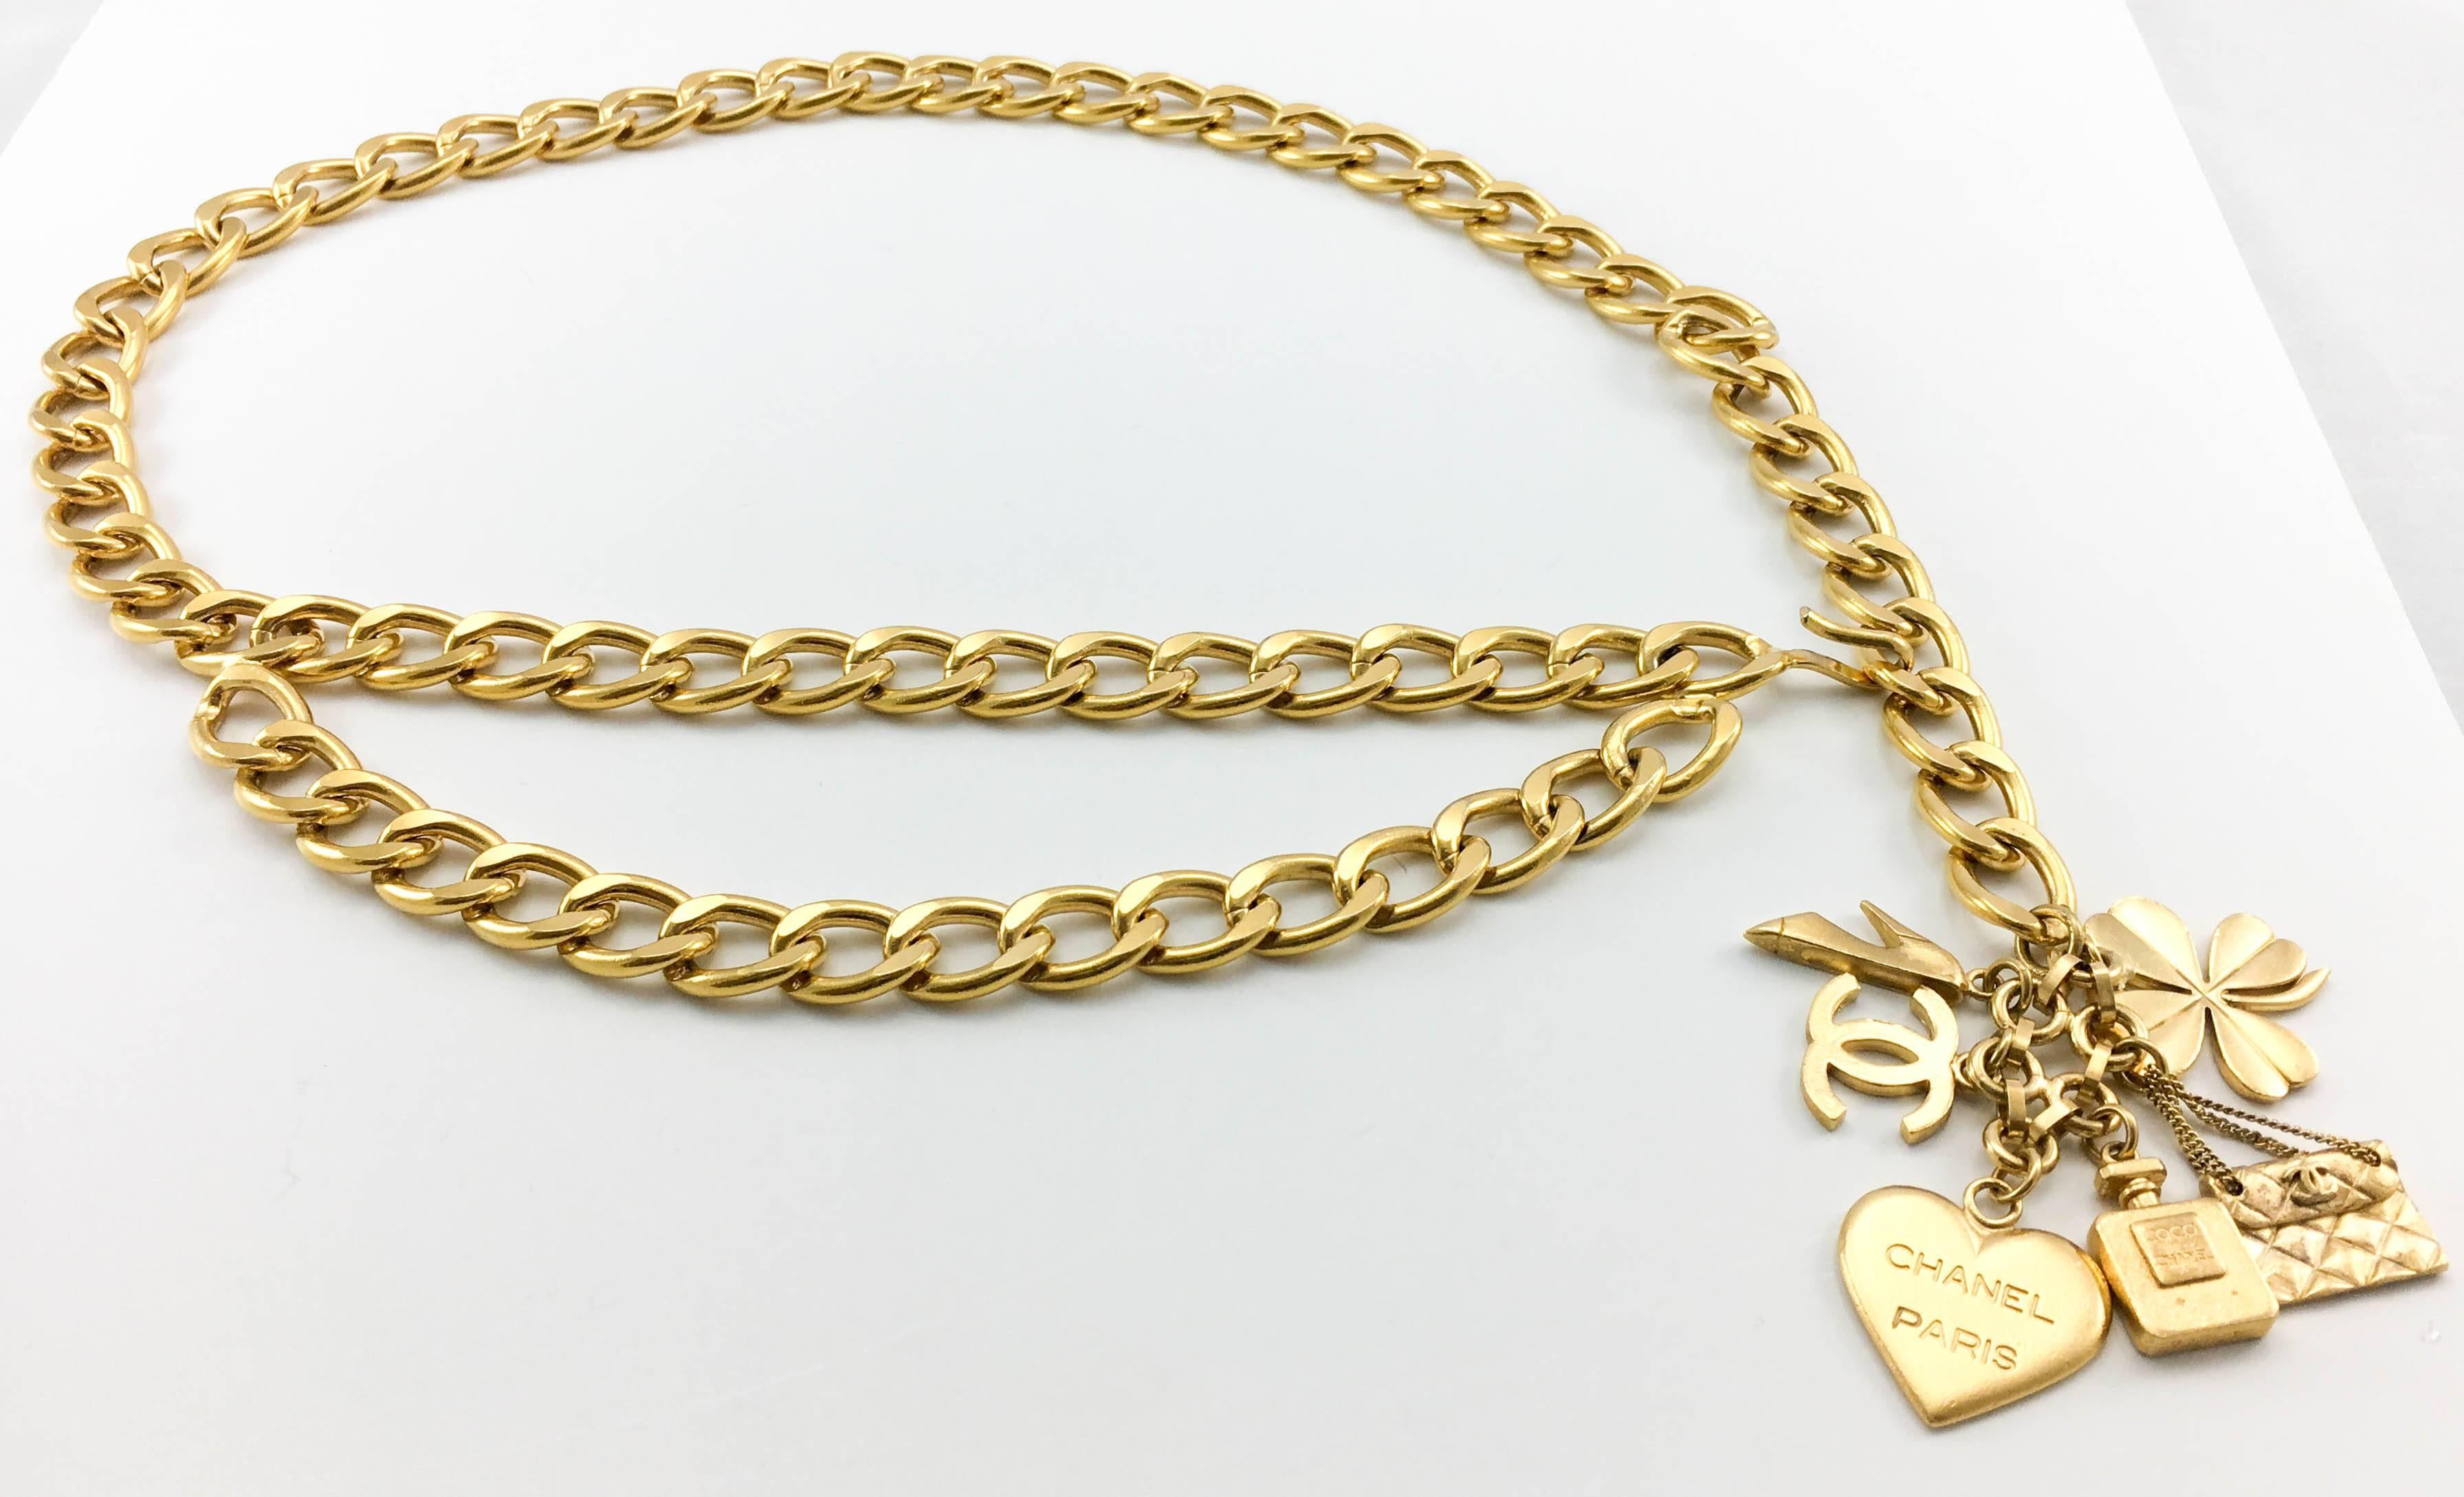 Vintage Chanel Gilt Chain With Charms Belt. This fabulous belt by Chanel was created for the 1996 Spring / Summer Collection. It is made in a chunky gilt metal chain with a 2-tier design on the front. The main feature, however, must be the charms at